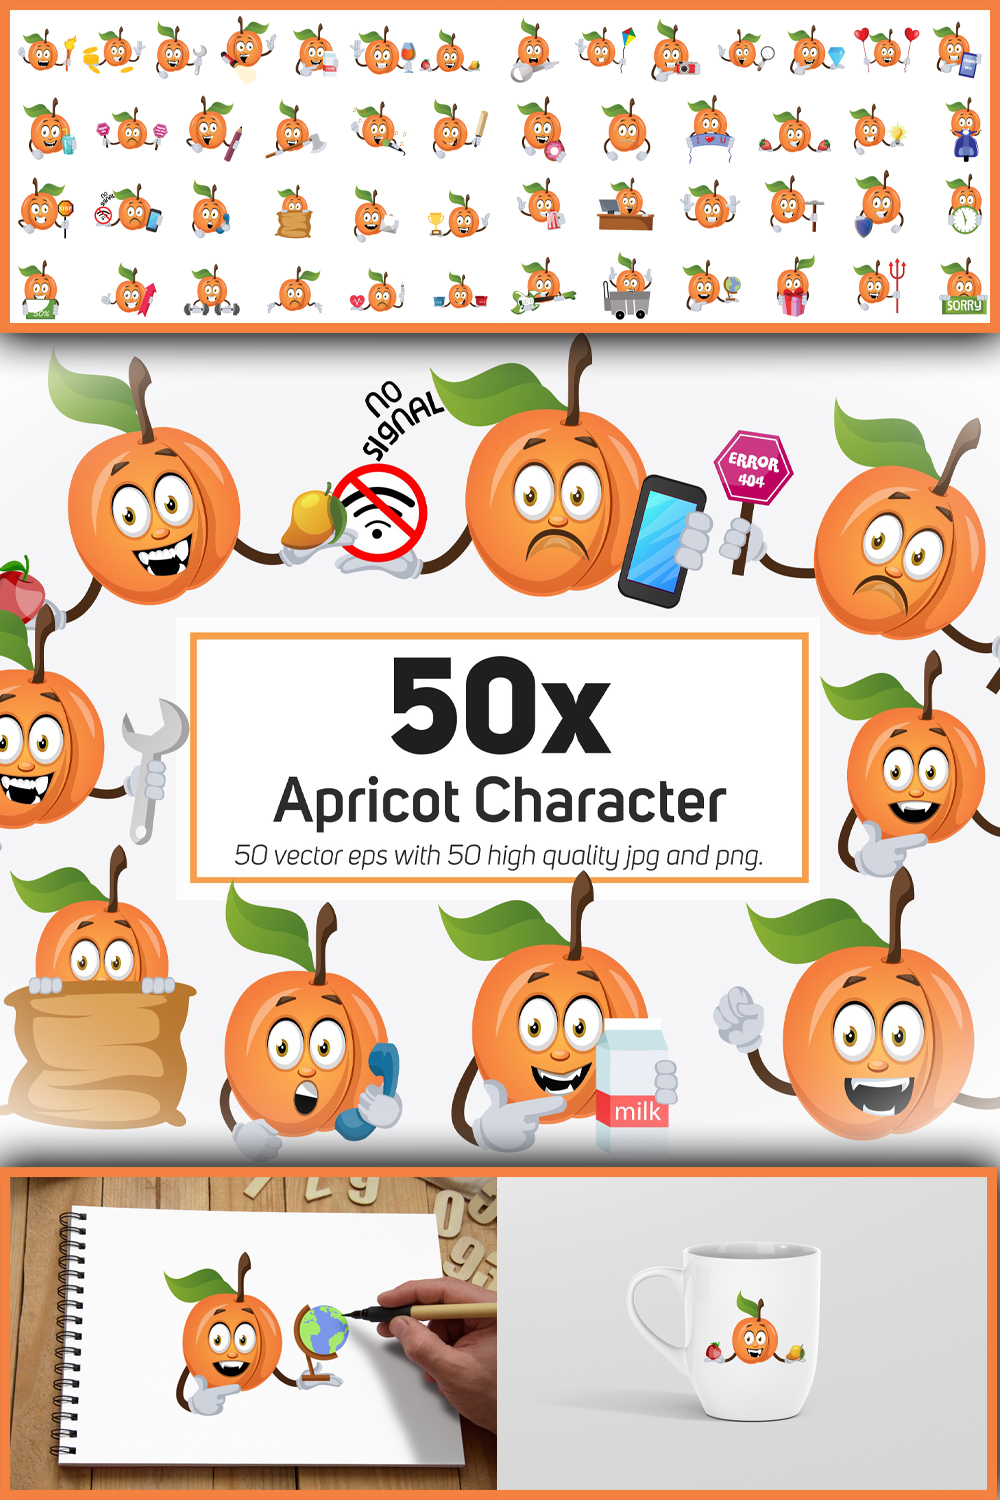 542757 50x apricot character and mascot collection illust pinterest 1000 1500 347